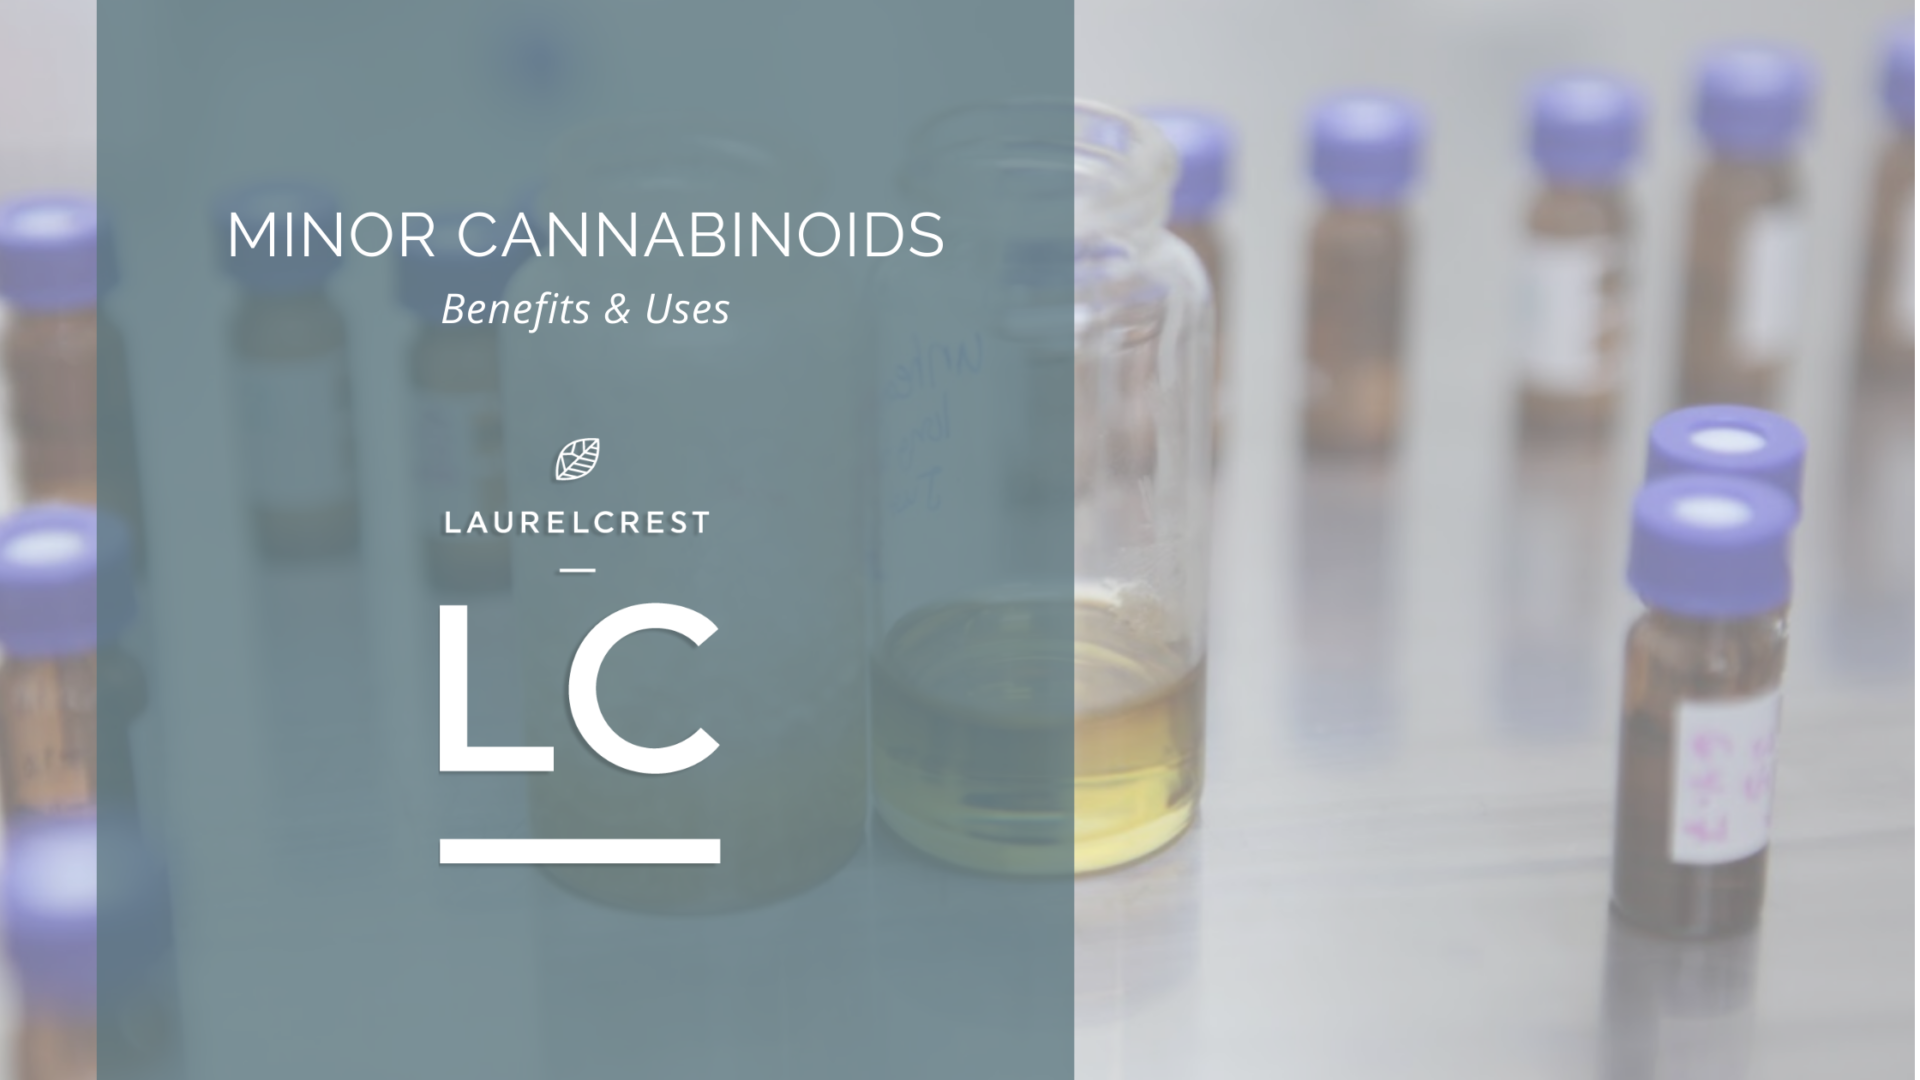 Cbc Oil A Cancer Inhibitor? - Cbd|Oil|Cbc|Benefits|Effects|Pain|Thc|Products|Health|Study|Cannabinoids|Cannabis|Anxiety|Studies|Hemp|Research|Symptoms|People|Treatment|System|Plant|Body|Inflammation|Product|Evidence|Receptors|Cancer|Side|Effect|Properties|Brain|Dose|Disease|Marijuana|Cannabidiol|Disorders|Cannabinoid|Way|Relief|Cells|Cbd Oil|Cbc Oil|Cbd Products|Side Effects|Endocannabinoid System|Chronic Pain|Cannabis Plant|Pain Relief|Cbd Oil Benefits|Cannabis Oil|Health Benefits|Multiple Sclerosis|Hemp Plant|Anti-Inflammatory Properties|Blood Pressure|Entourage Effect|Neuropathic Pain|Cbd Product|Hemp Oil|Full-Spectrum Cbd Oil|Nervous System|Hemp Seed Oil|High Blood Pressure|Immune System|Cbd Gummies|Cannabis Oil Benefits|Drug Administration|Anxiety Disorders|Dravet Syndrome|Lennox-Gastaut Syndrome